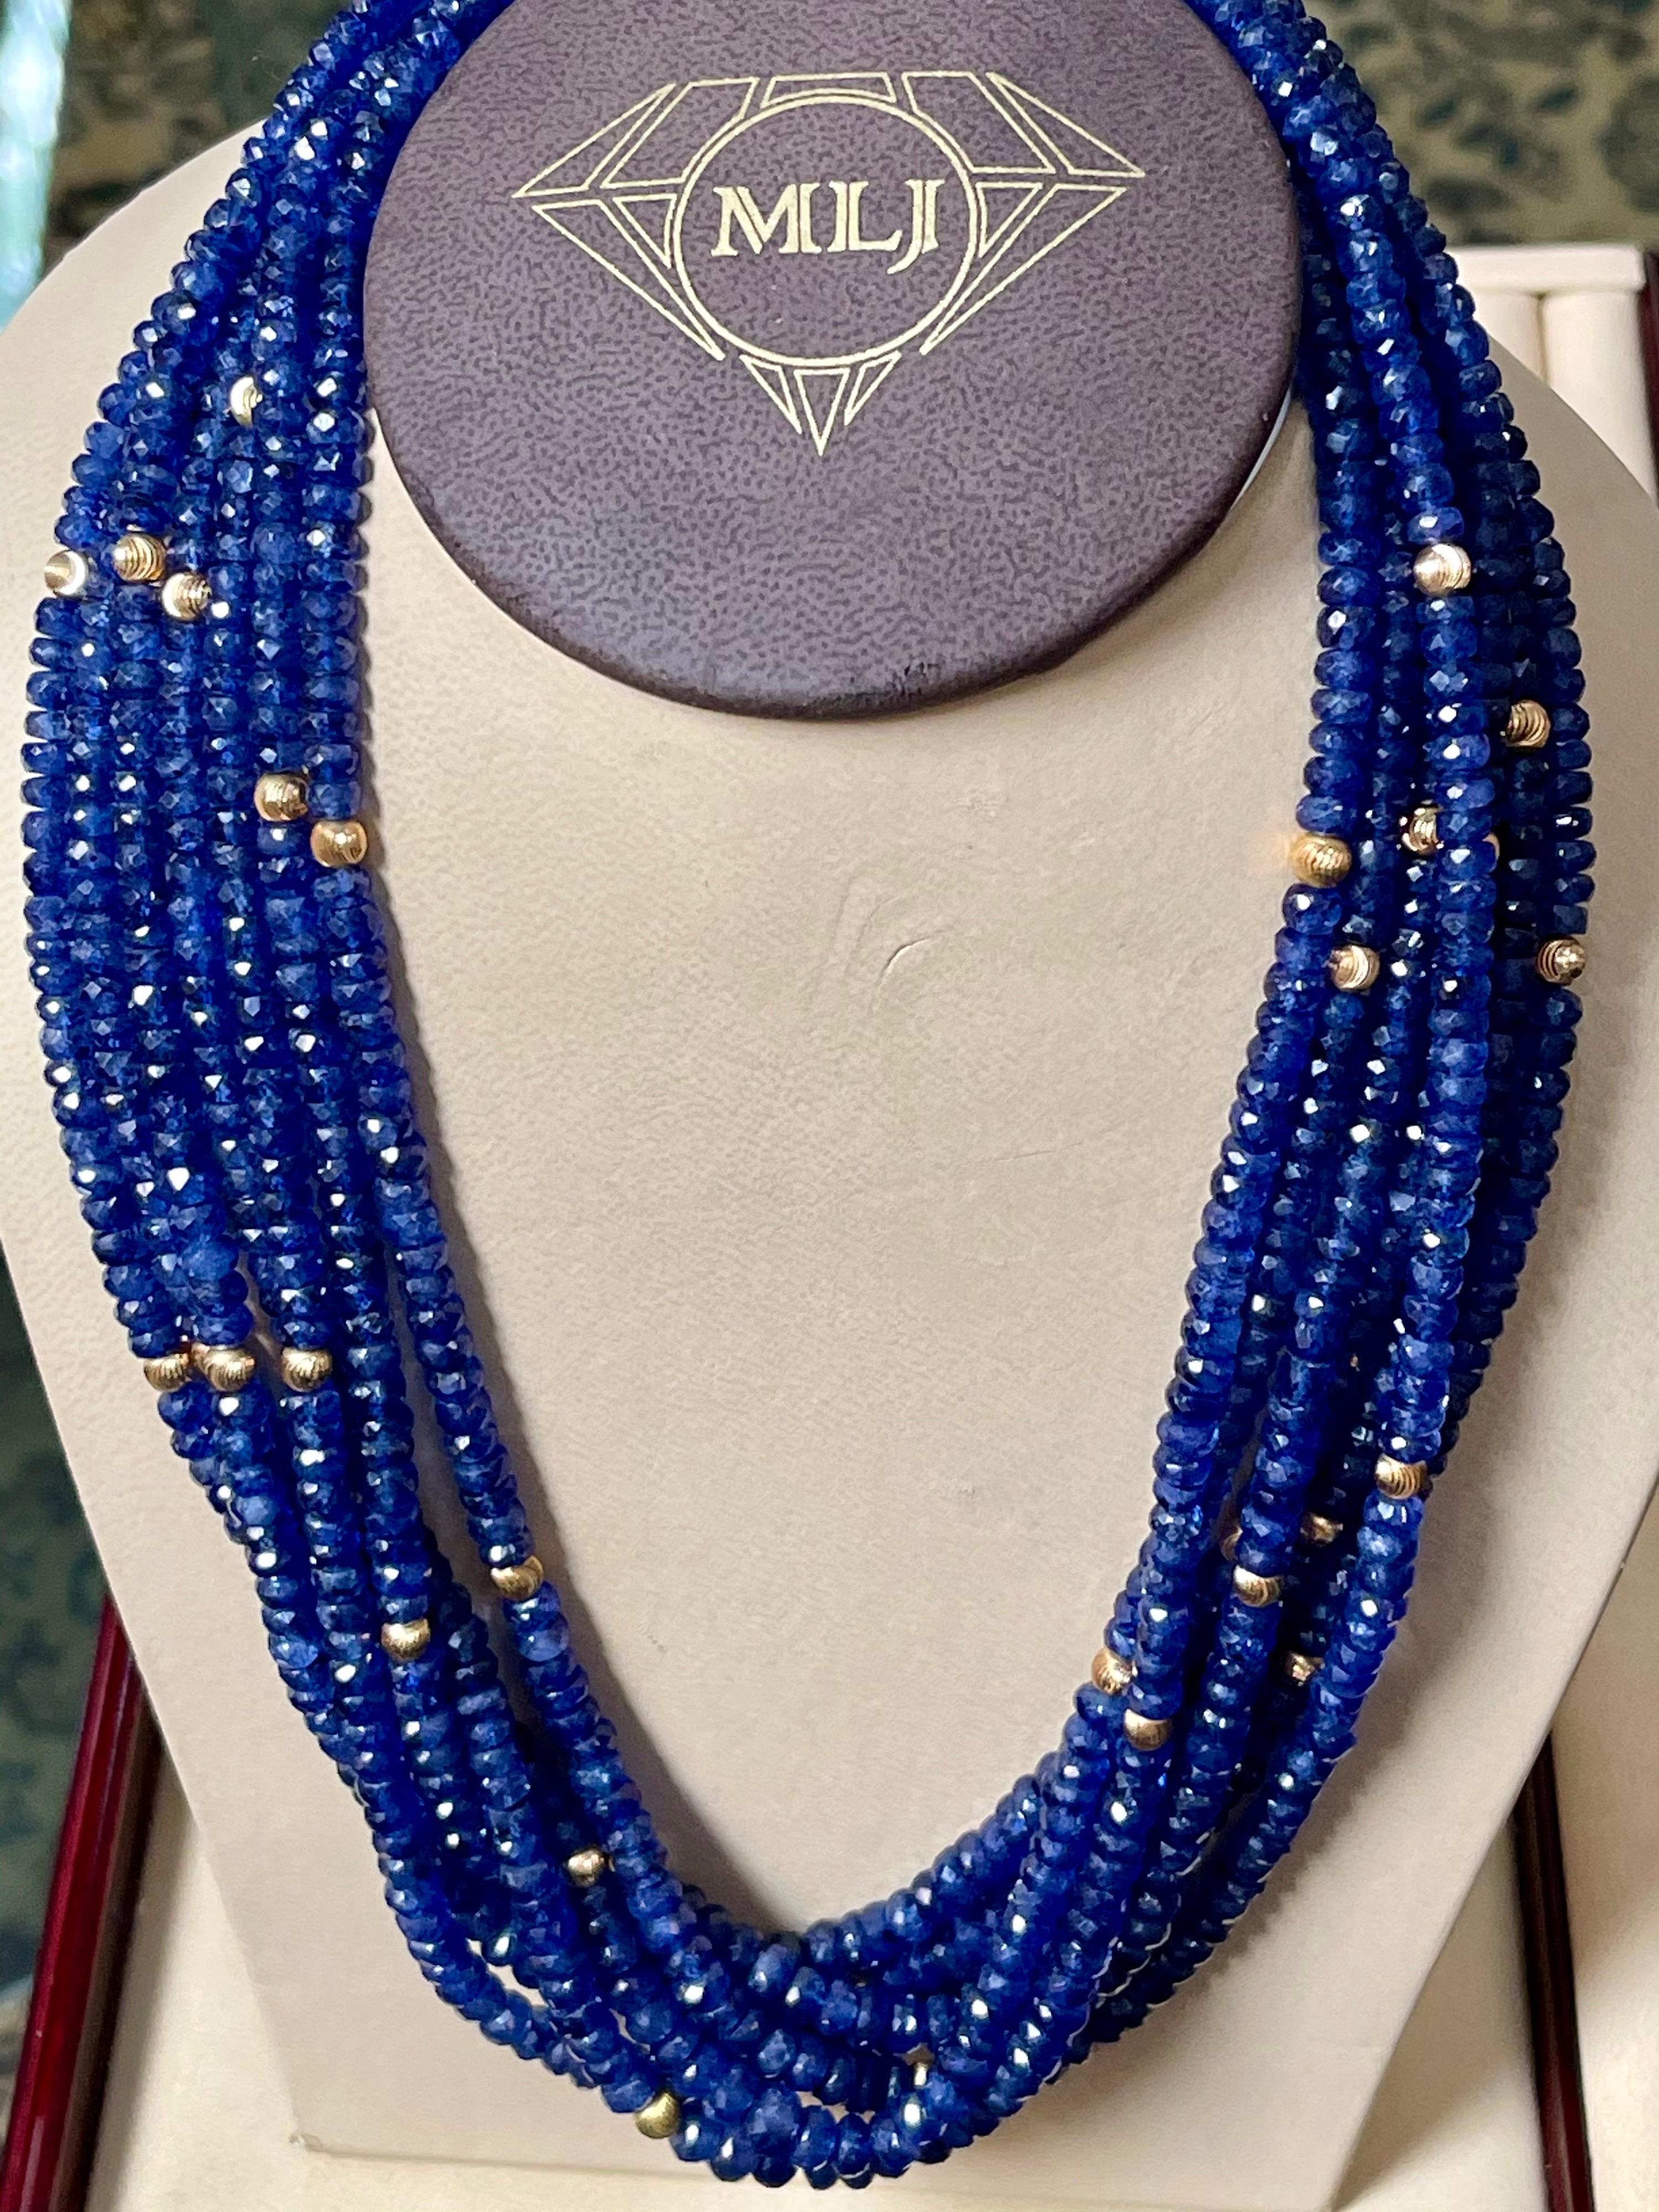 Twisted 1275 Ct Natural Tanzanite Bead Seven Strand Necklace + 15 Gm 14 K Y Gold For Sale 6